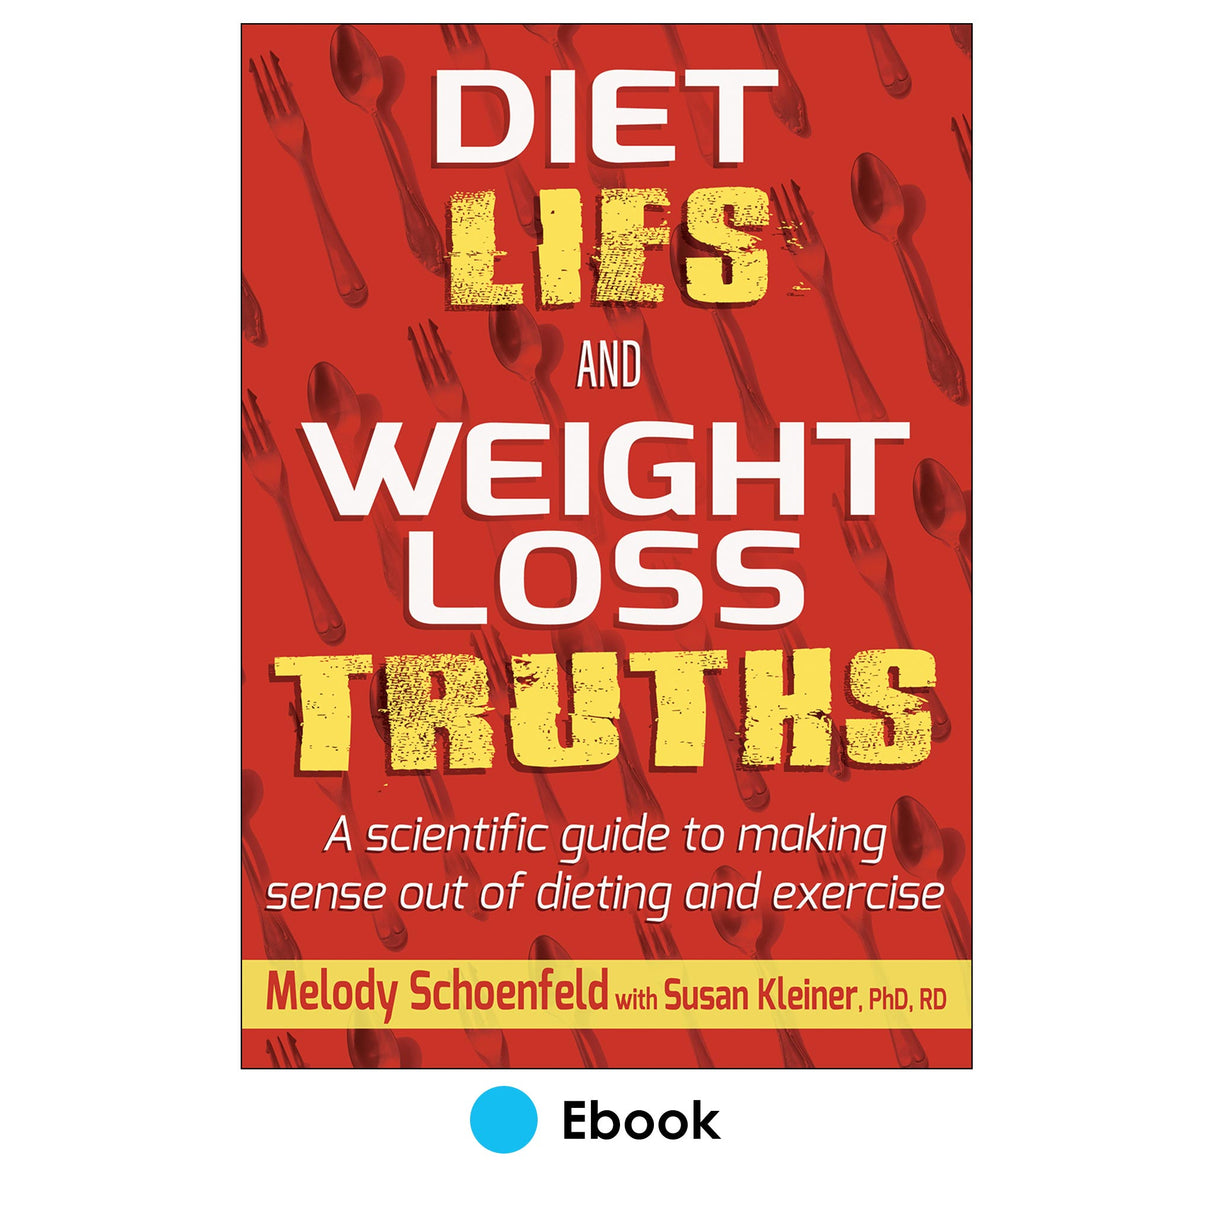 Diet Lies and Weight Loss Truths epub